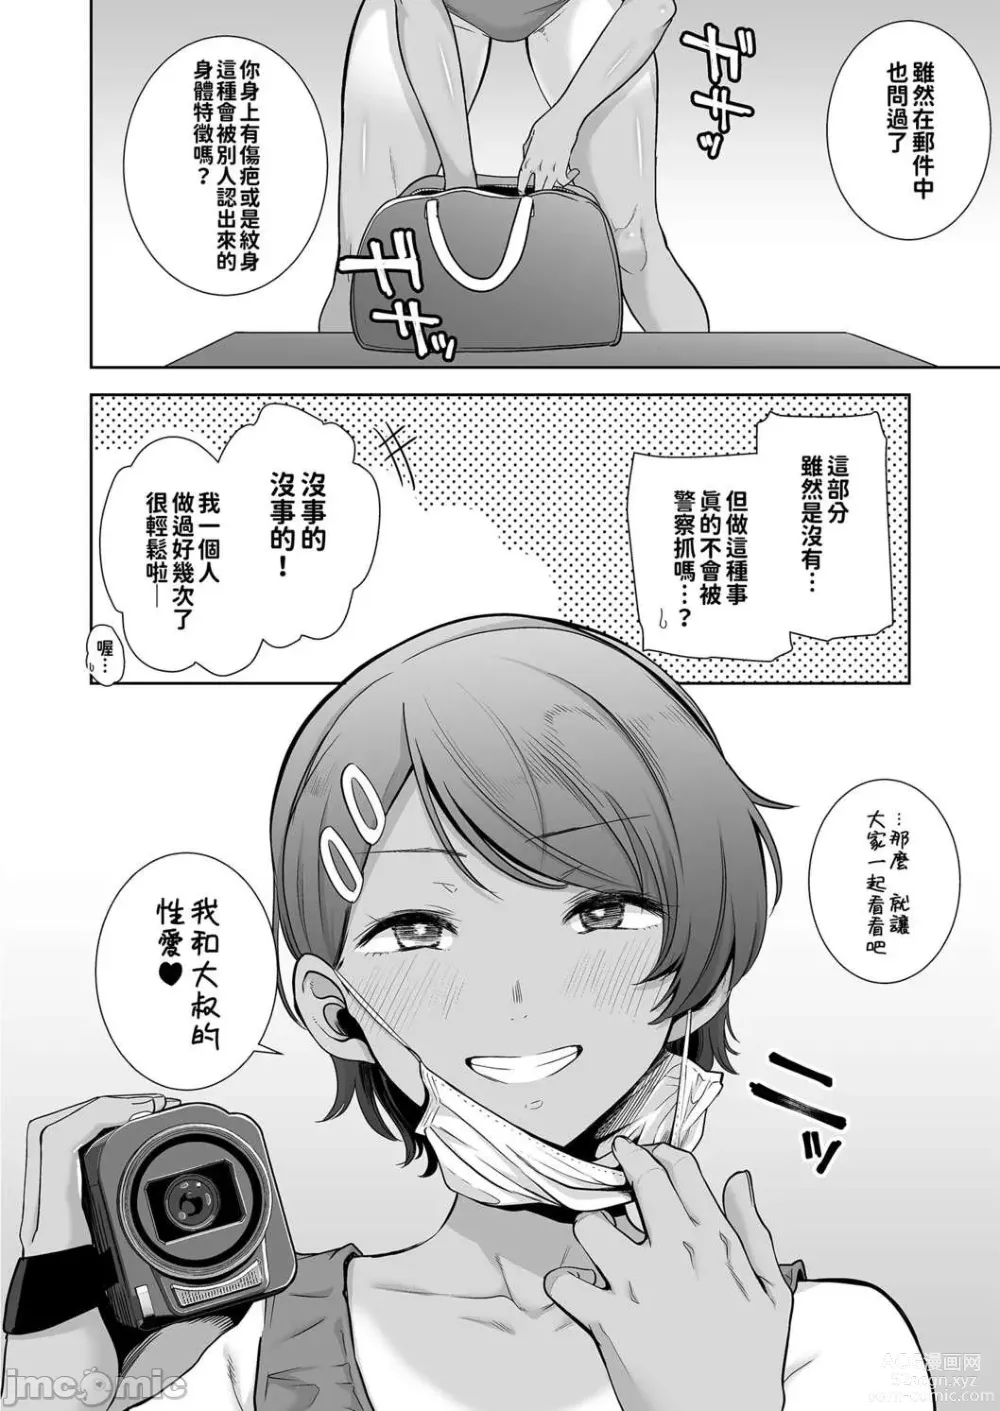 Page 10 of doujinshi 聖華女学院高等部公認竿おじさん 2